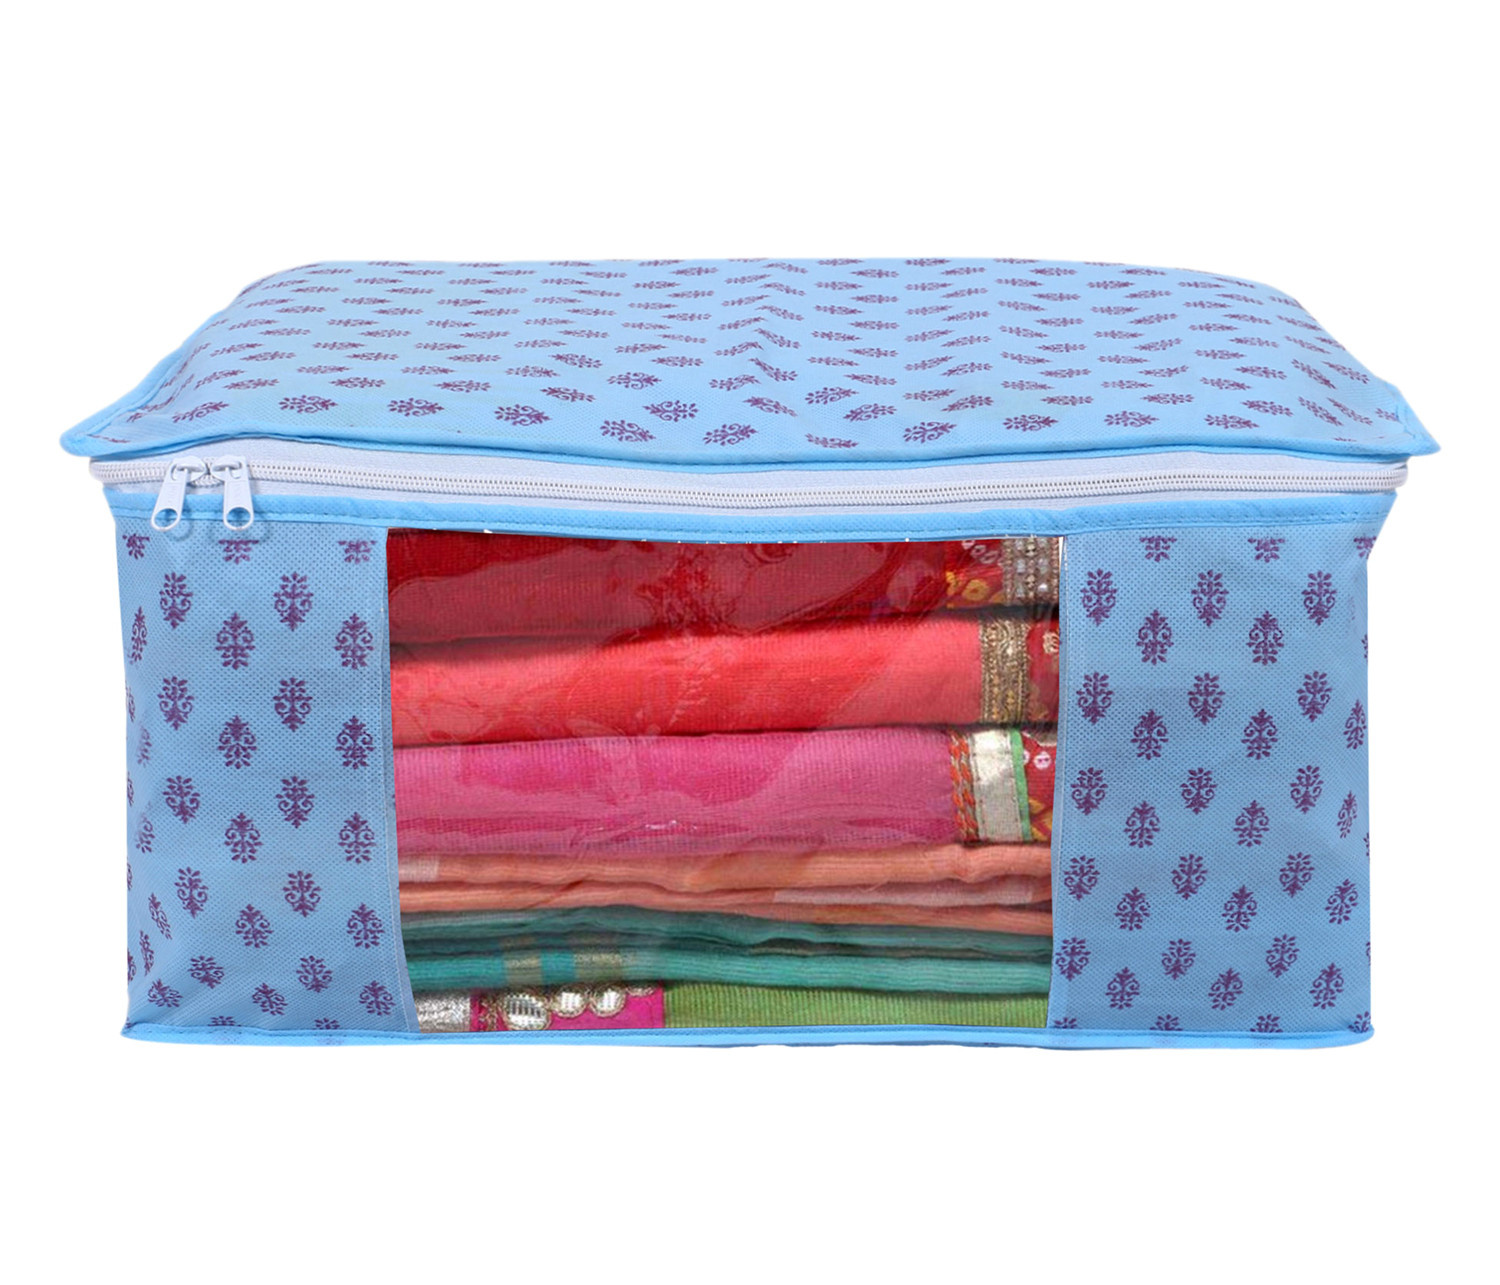 Kuber industries Non-Woven Floral Print 2 Pieces Underbed Storage Bag & 2 Pieces Saree Cover With Transparent Window,(Sky Blue)